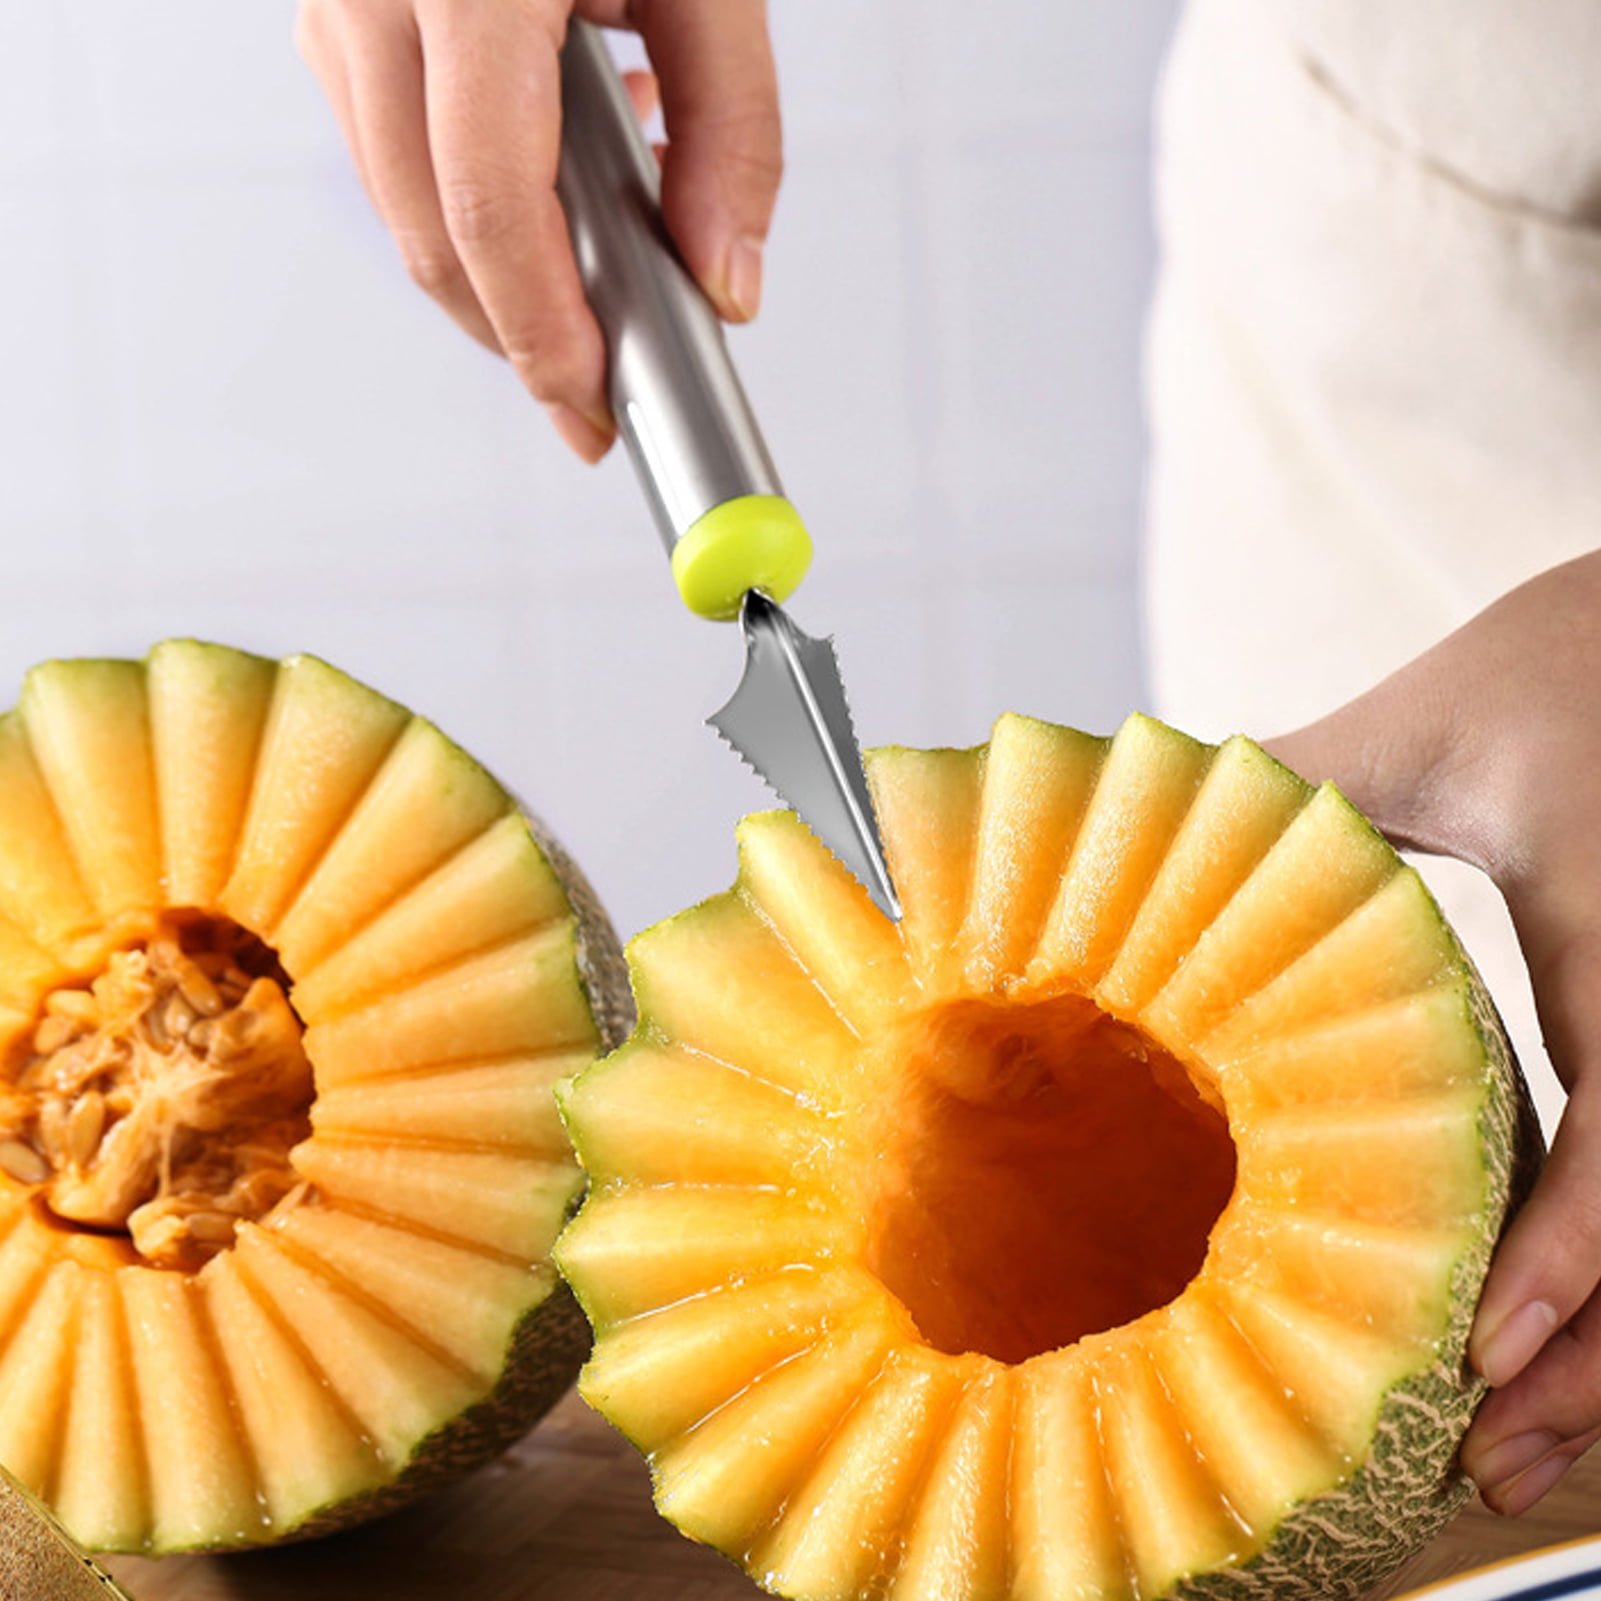 Shop for 3 in 1 Melon Baller Scoop + Fruit Peeler + Carving Knife for  Fruits Ice Cream Cookie Dough Butter Stainless Steel Kitchen Gadget Tool at  Wholesale Price on